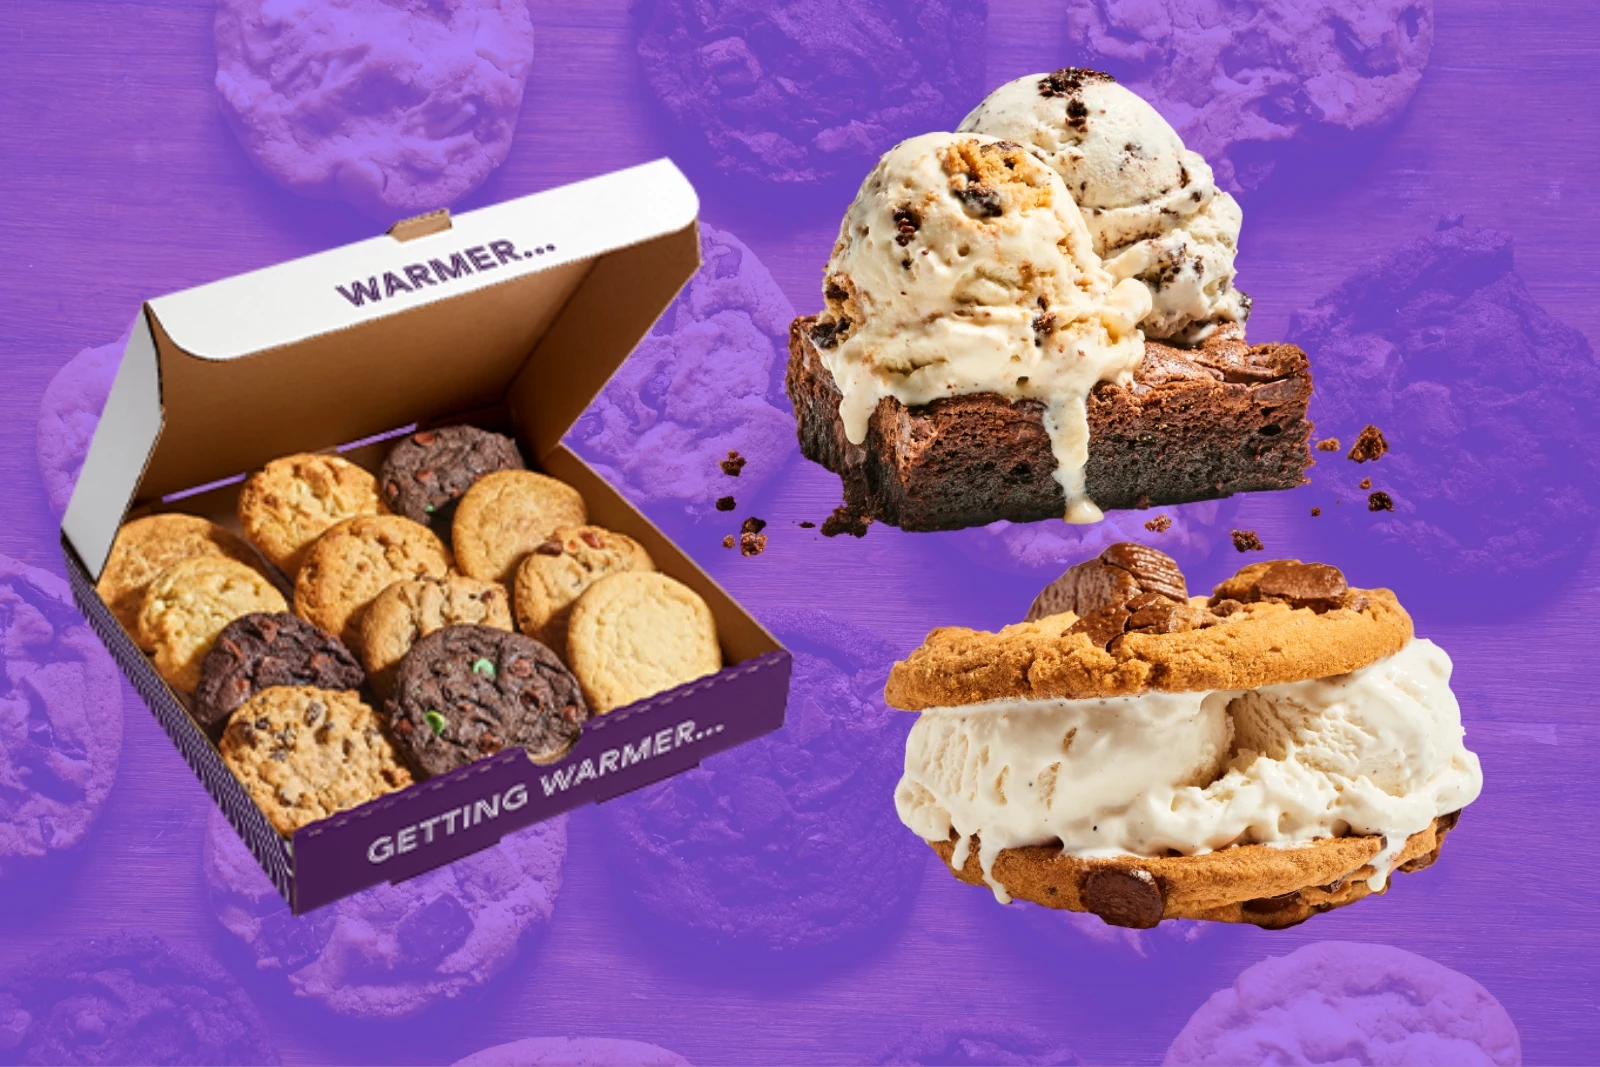 Insomnia Cookies Announces Grand Opening Celebration In Duluth